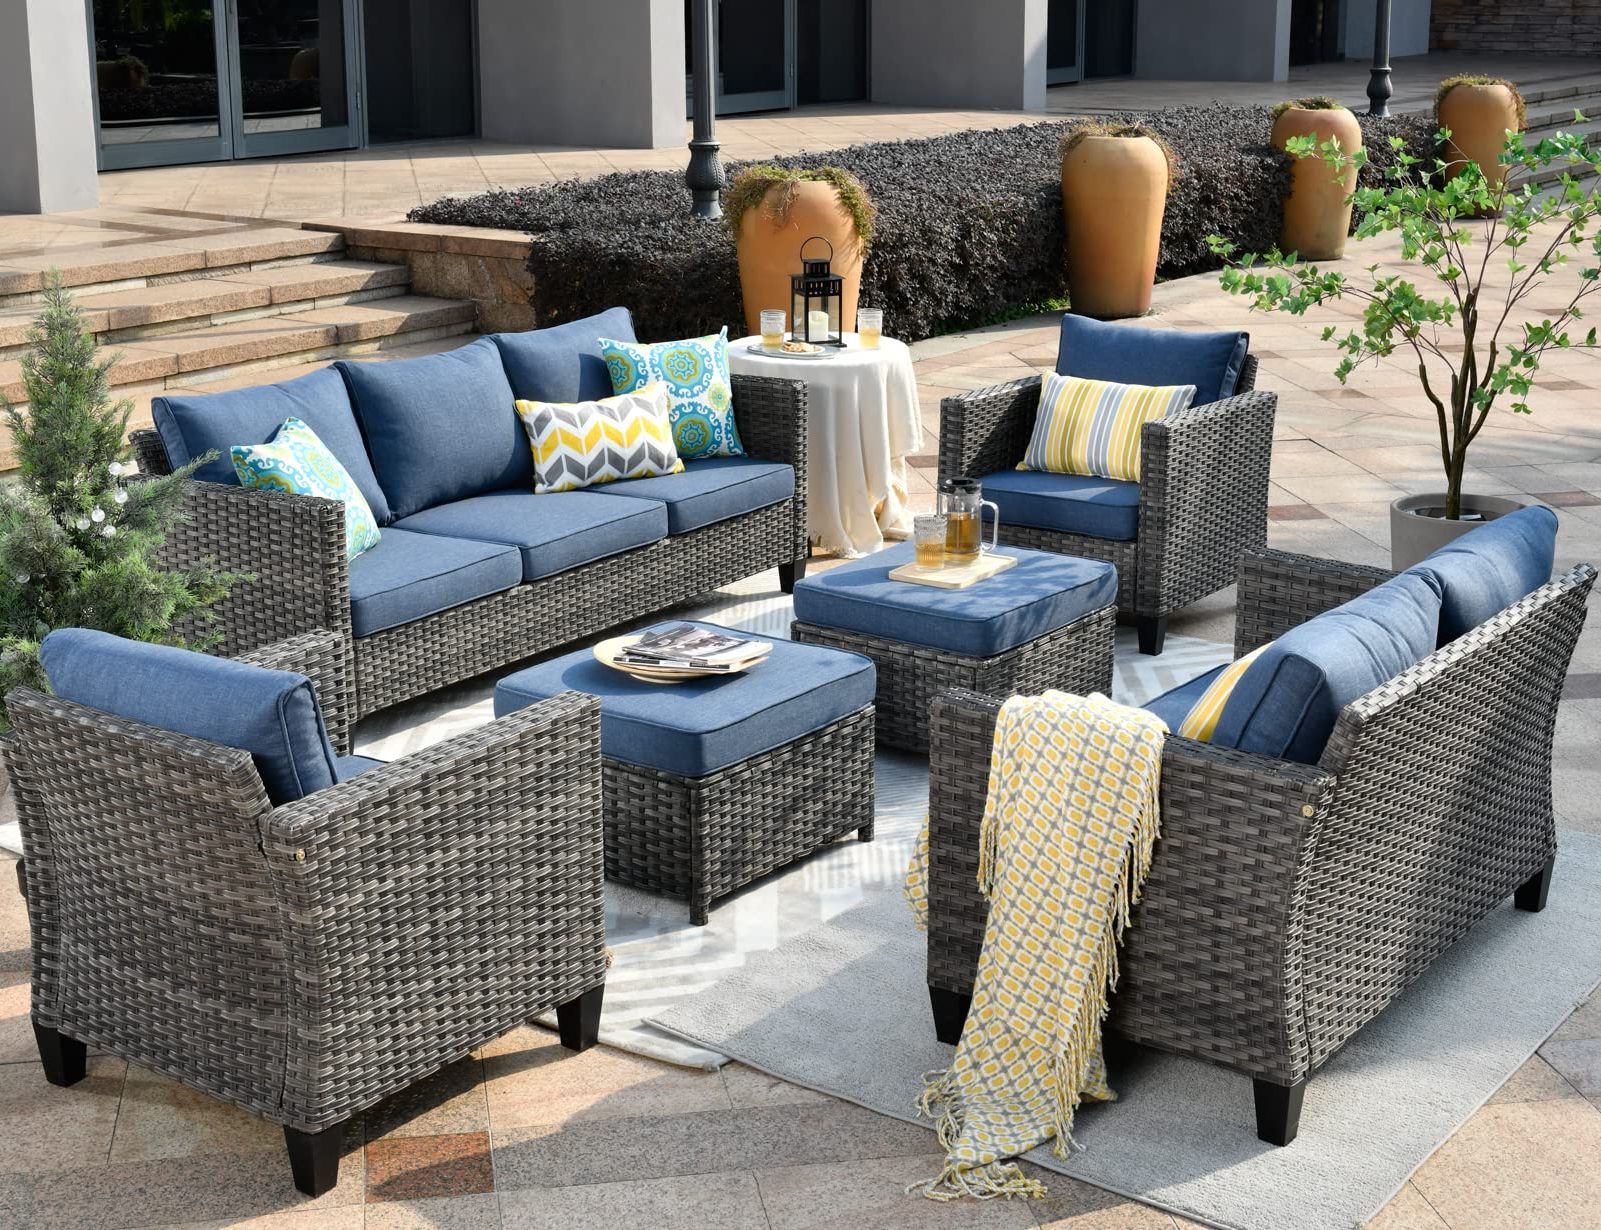 Most Recently Released Loveseat Chairs For Backyard With Regard To Amazon: Ovios Patio Furniture Set 6 Pcs Outdoor Sectional Sofa Set With Loveseat  Chairs Ottomans High Back Sofa All Weather Wicker Rattan Conversation Sets  For Yard Porch (denim Blue) : Patio, Lawn (Photo 3 of 15)